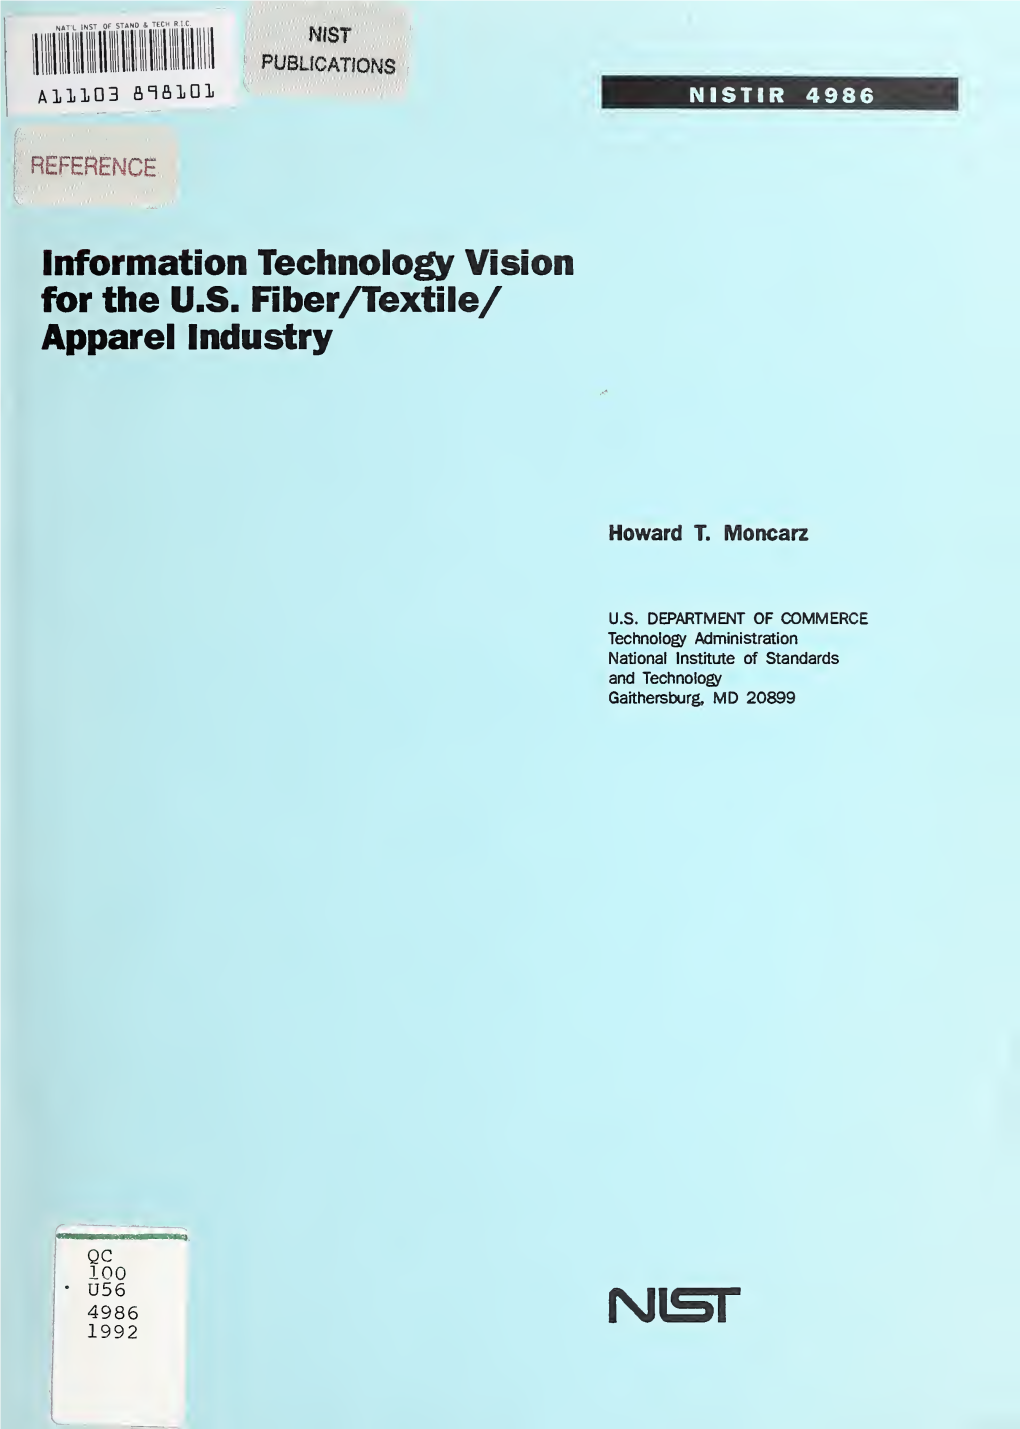 Information Technology Vision for the U.S. Fiber/Textile/Apparel Industry